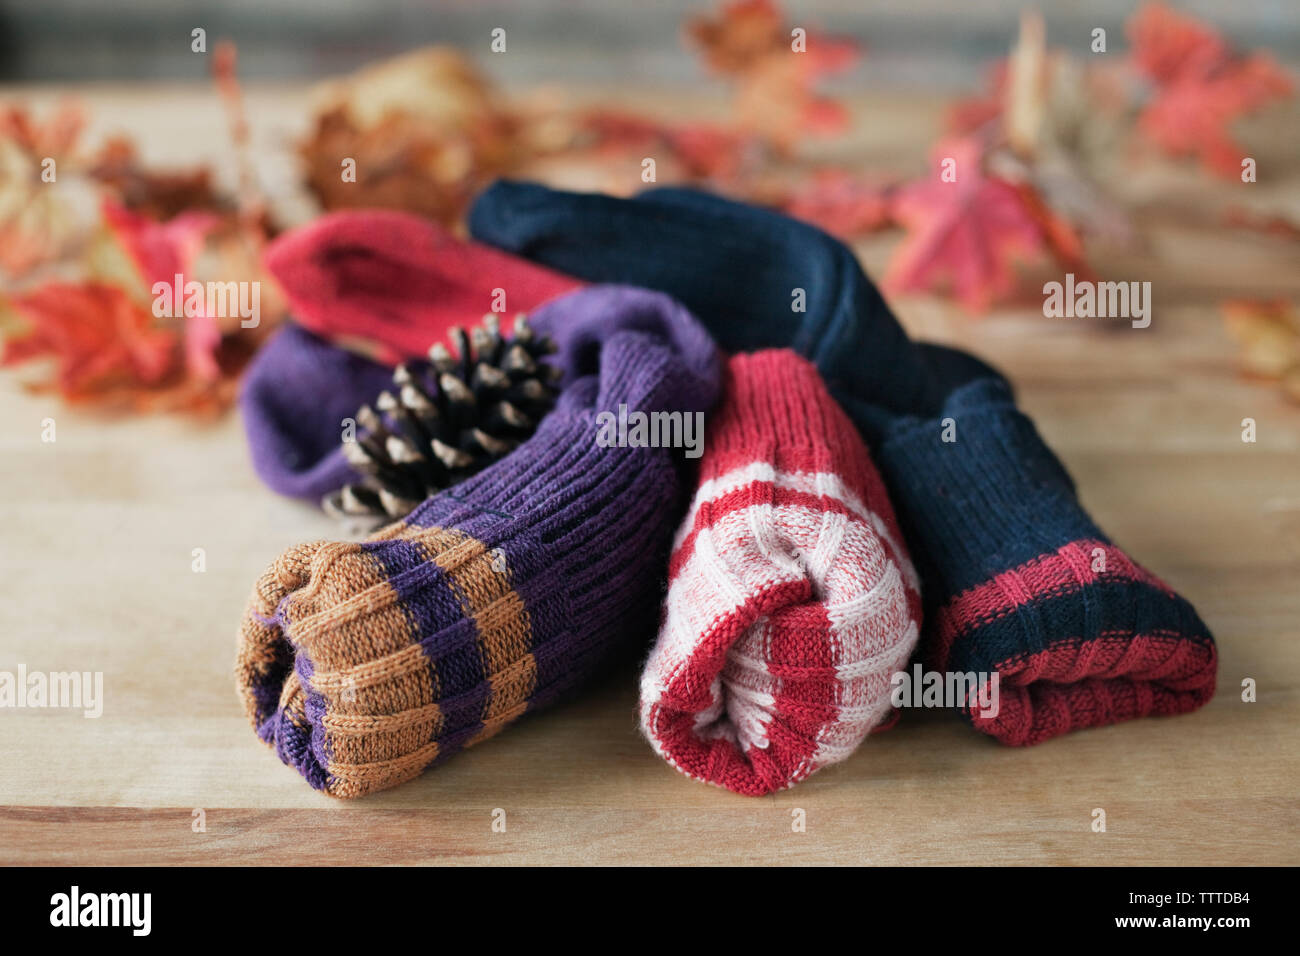 Close-up of socks on table Stock Photo